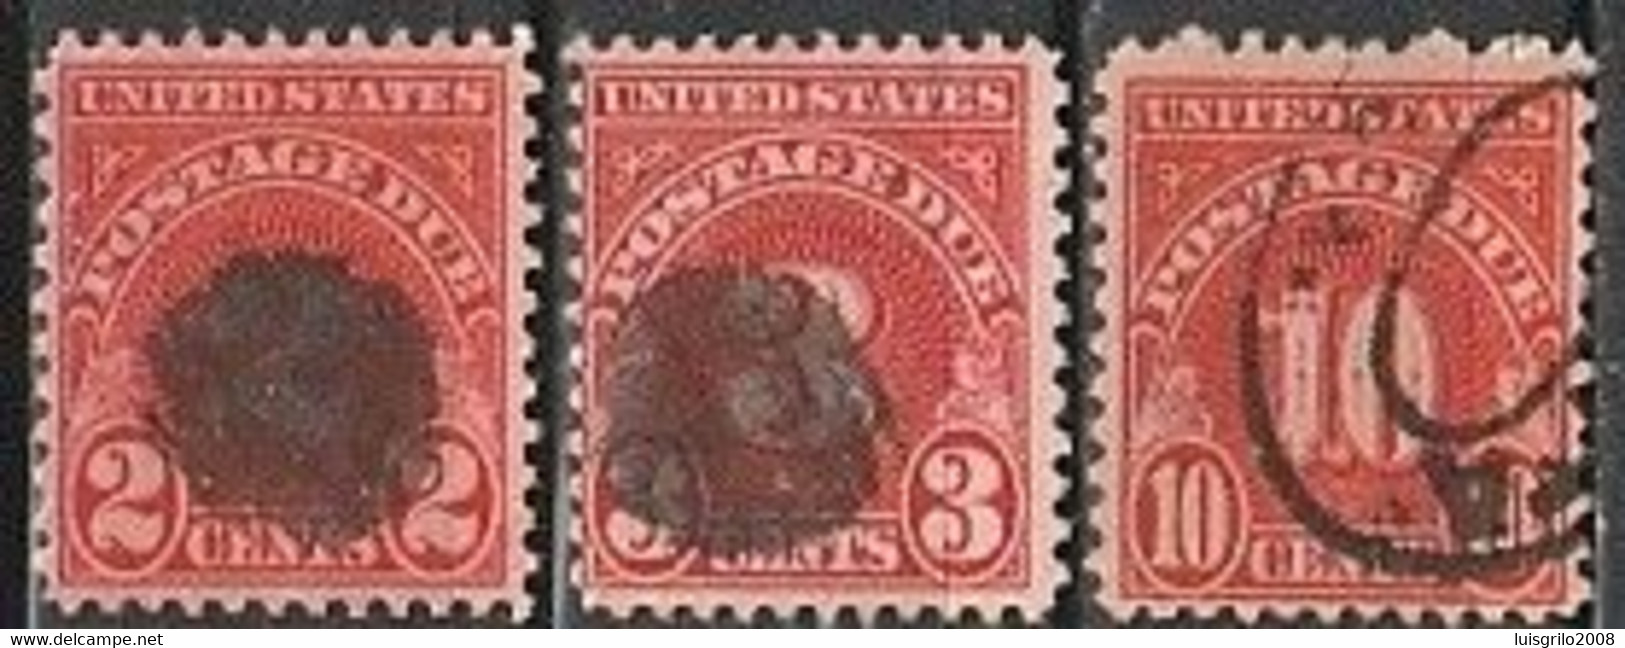 Postage Due -  United States, 1930 - Postage Due